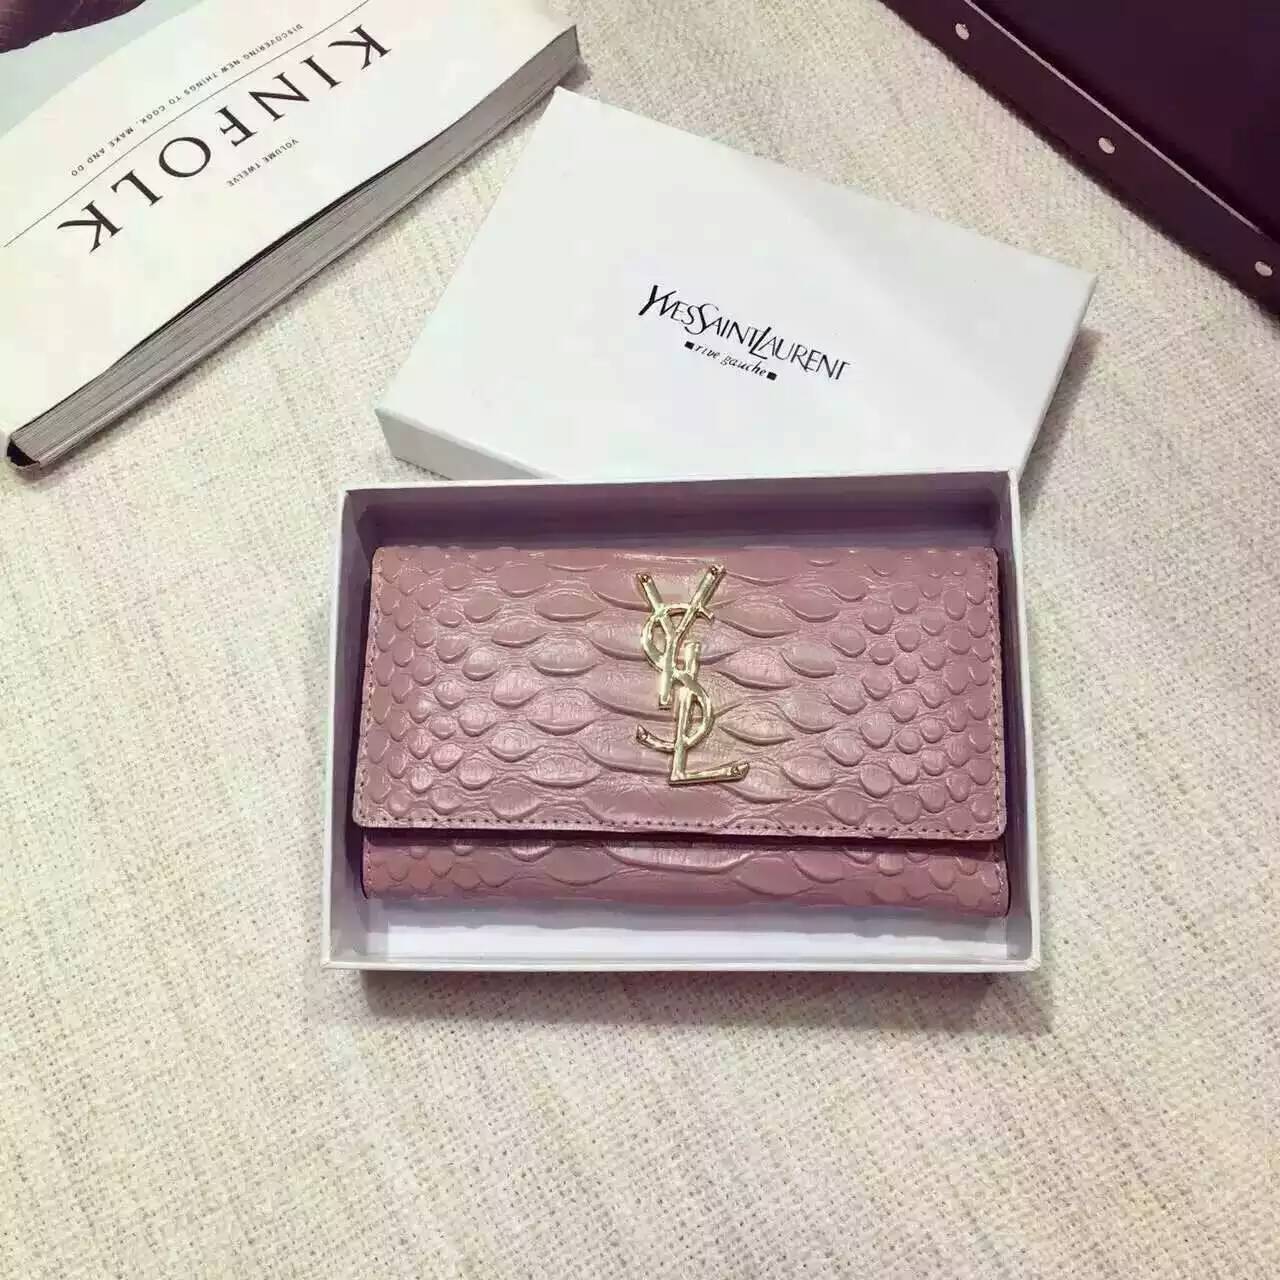 Limited Edition!2016 New Saint Laurent Small Leather Goods Cheap Sale-Saint Laurent Wallet in Pink Python Embossed Leather